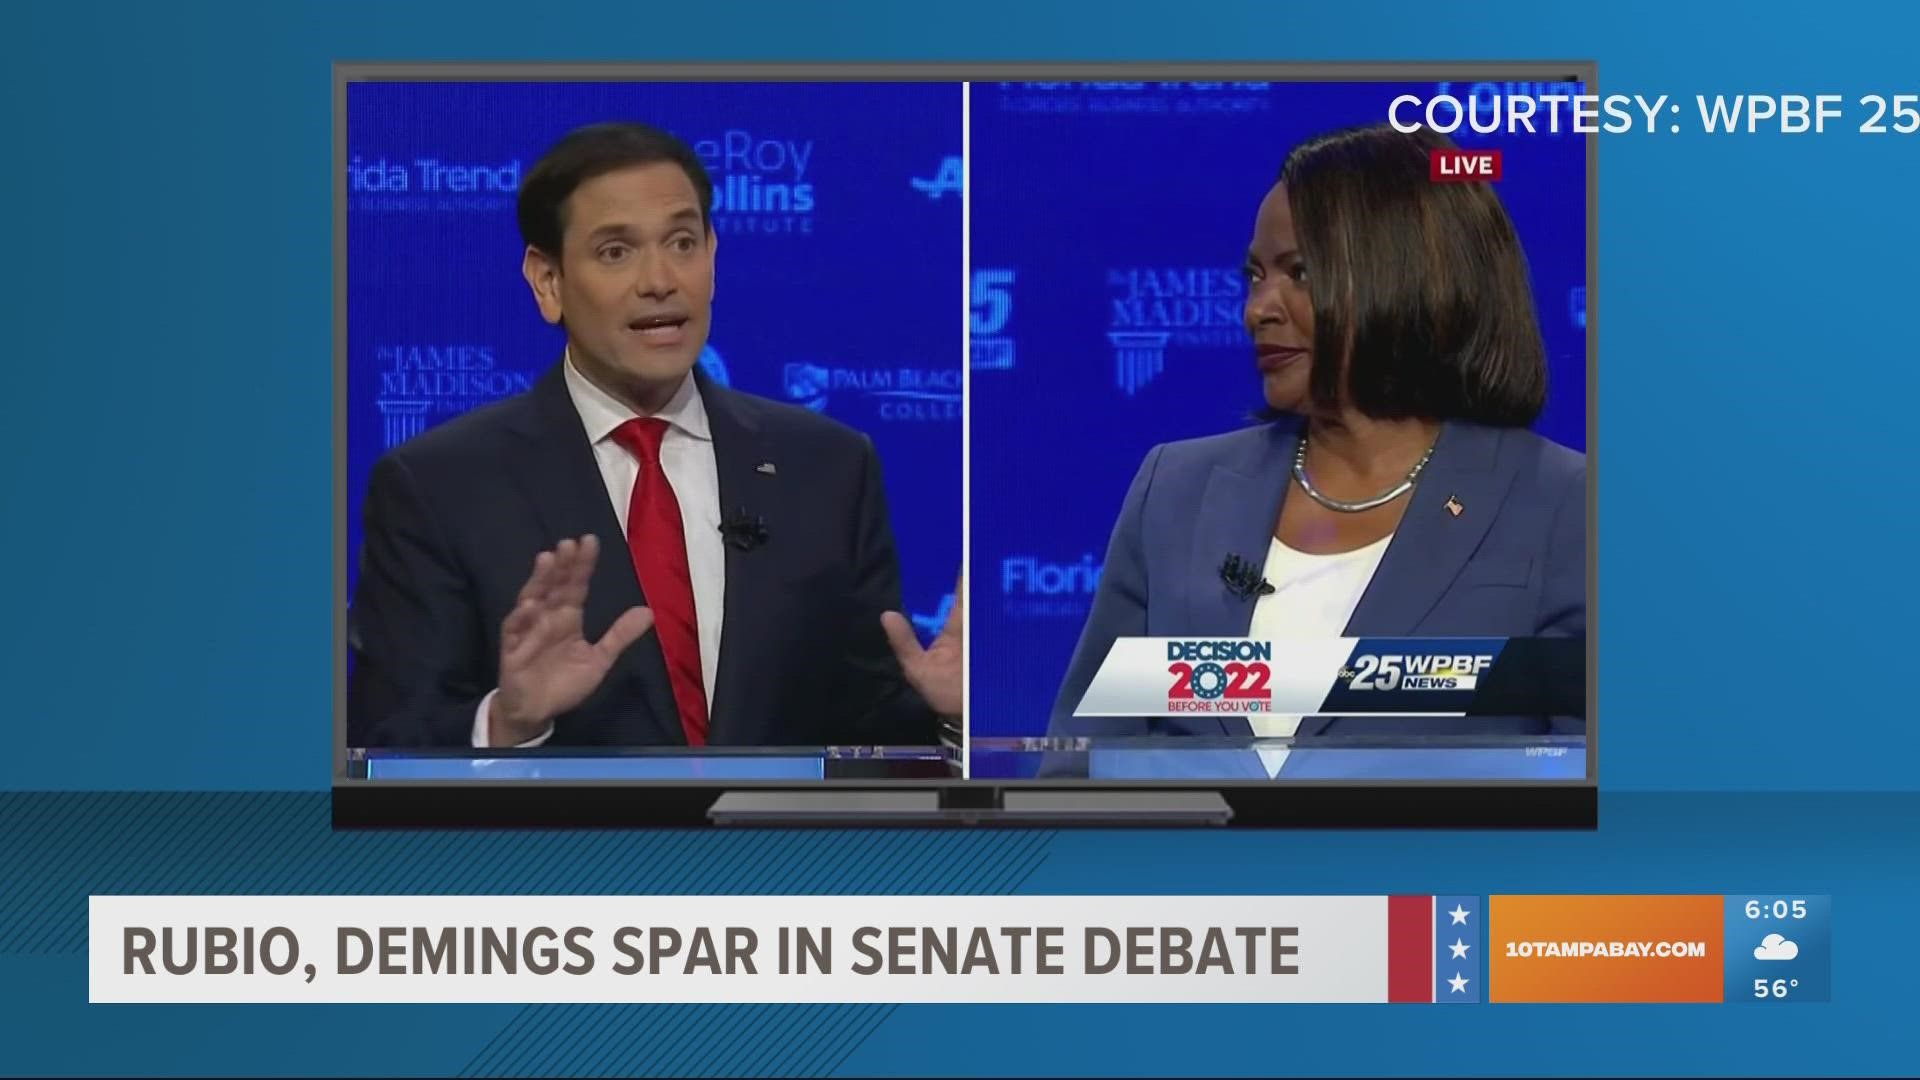 The two candidates sparred during their only televised debate before the midterm election on Nov. 8.